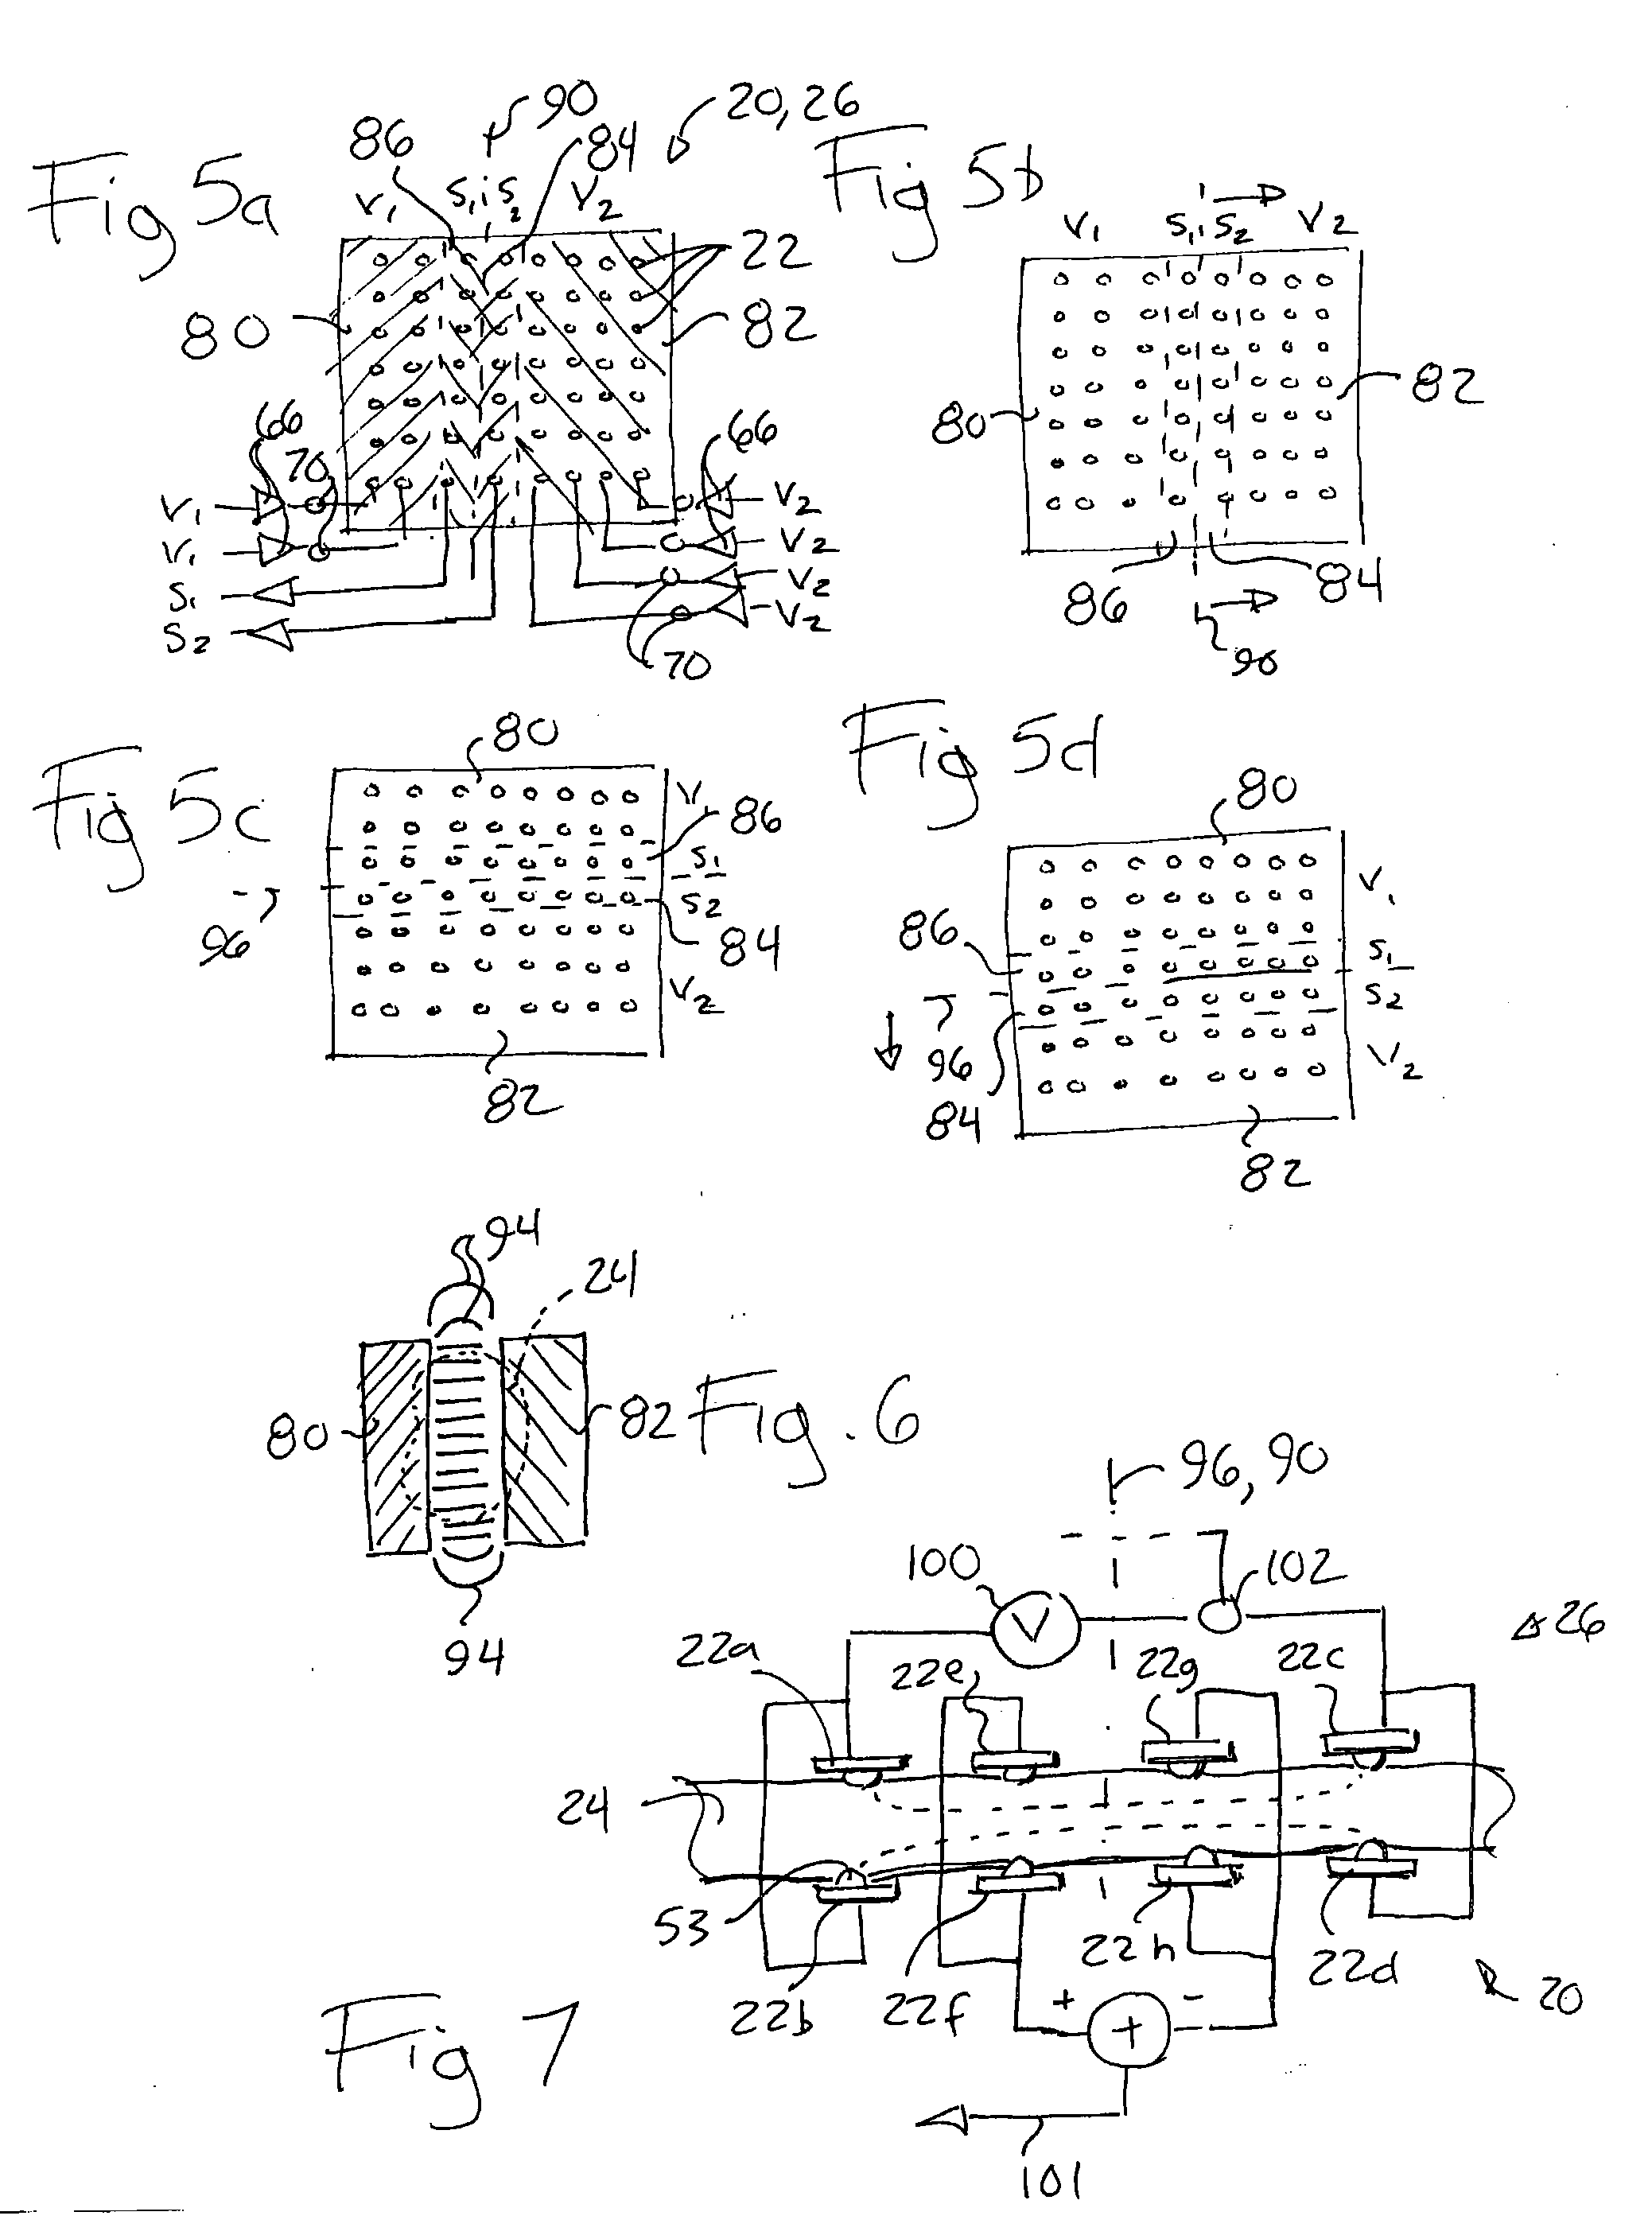 Apparatus and Method for Evaluating Ex Vivo Tissue Samples by Electrical Impedance